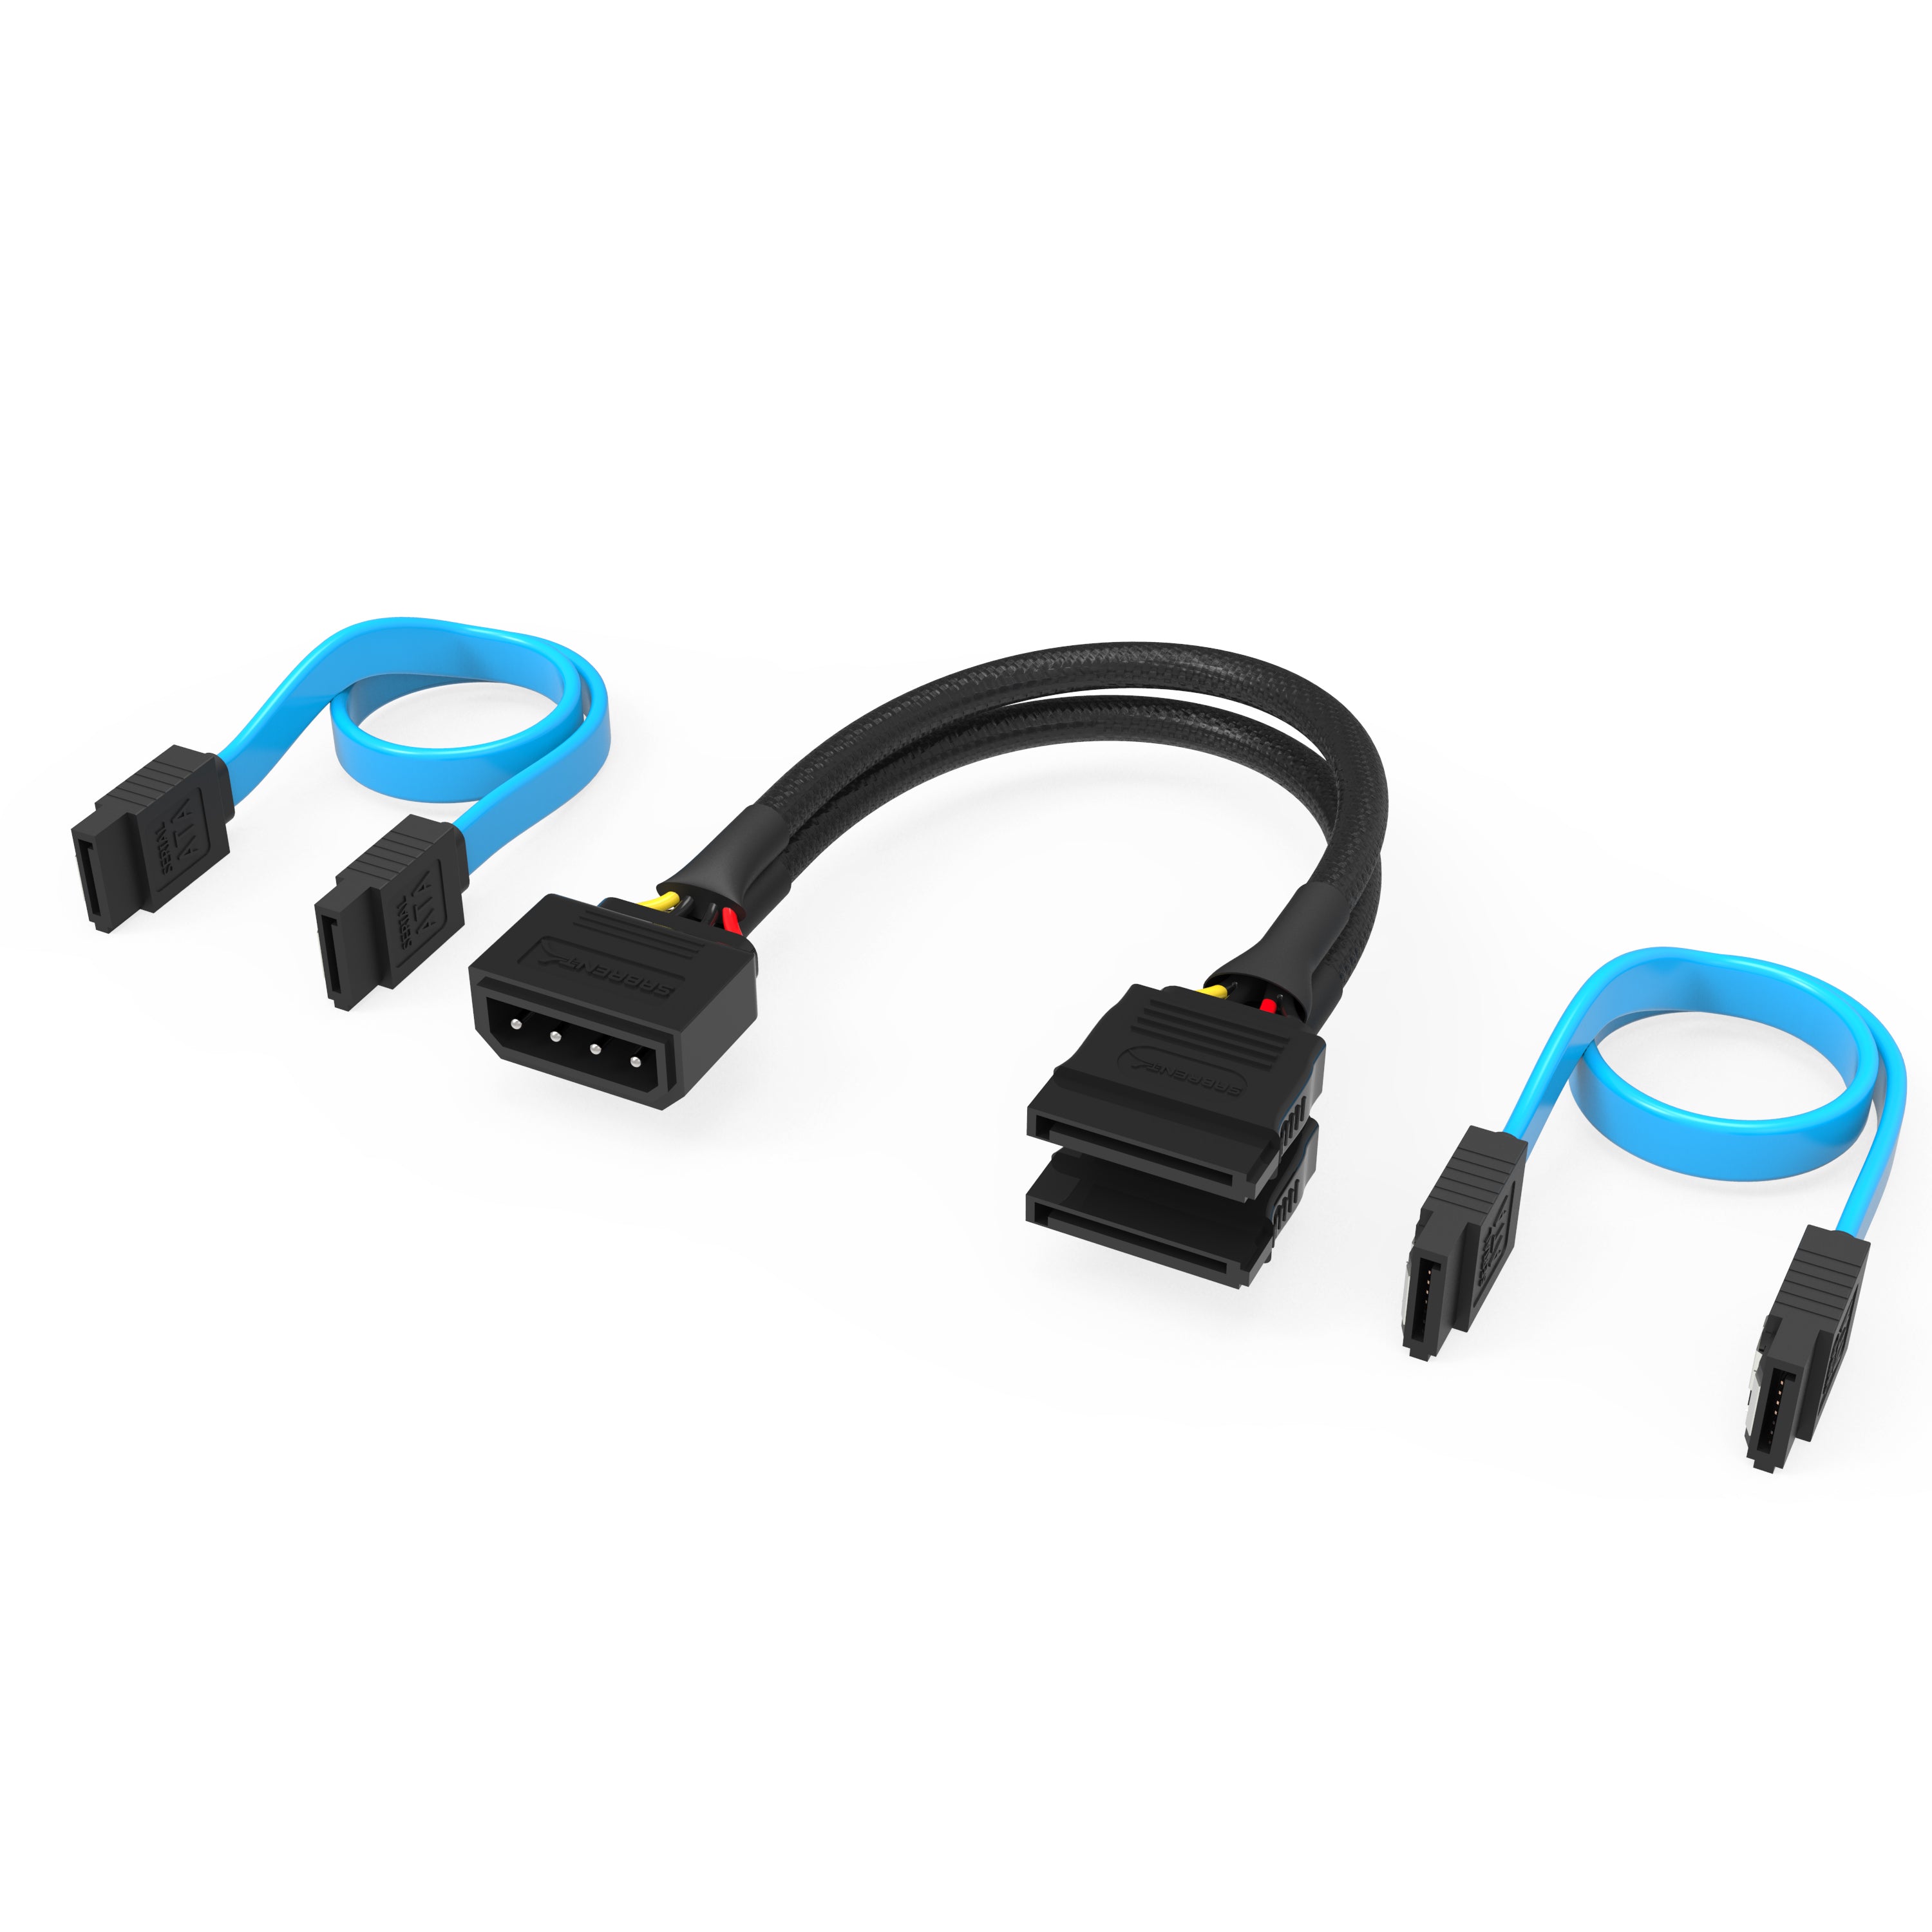 SSD / Hard Drive Connection Kit - Sabrent